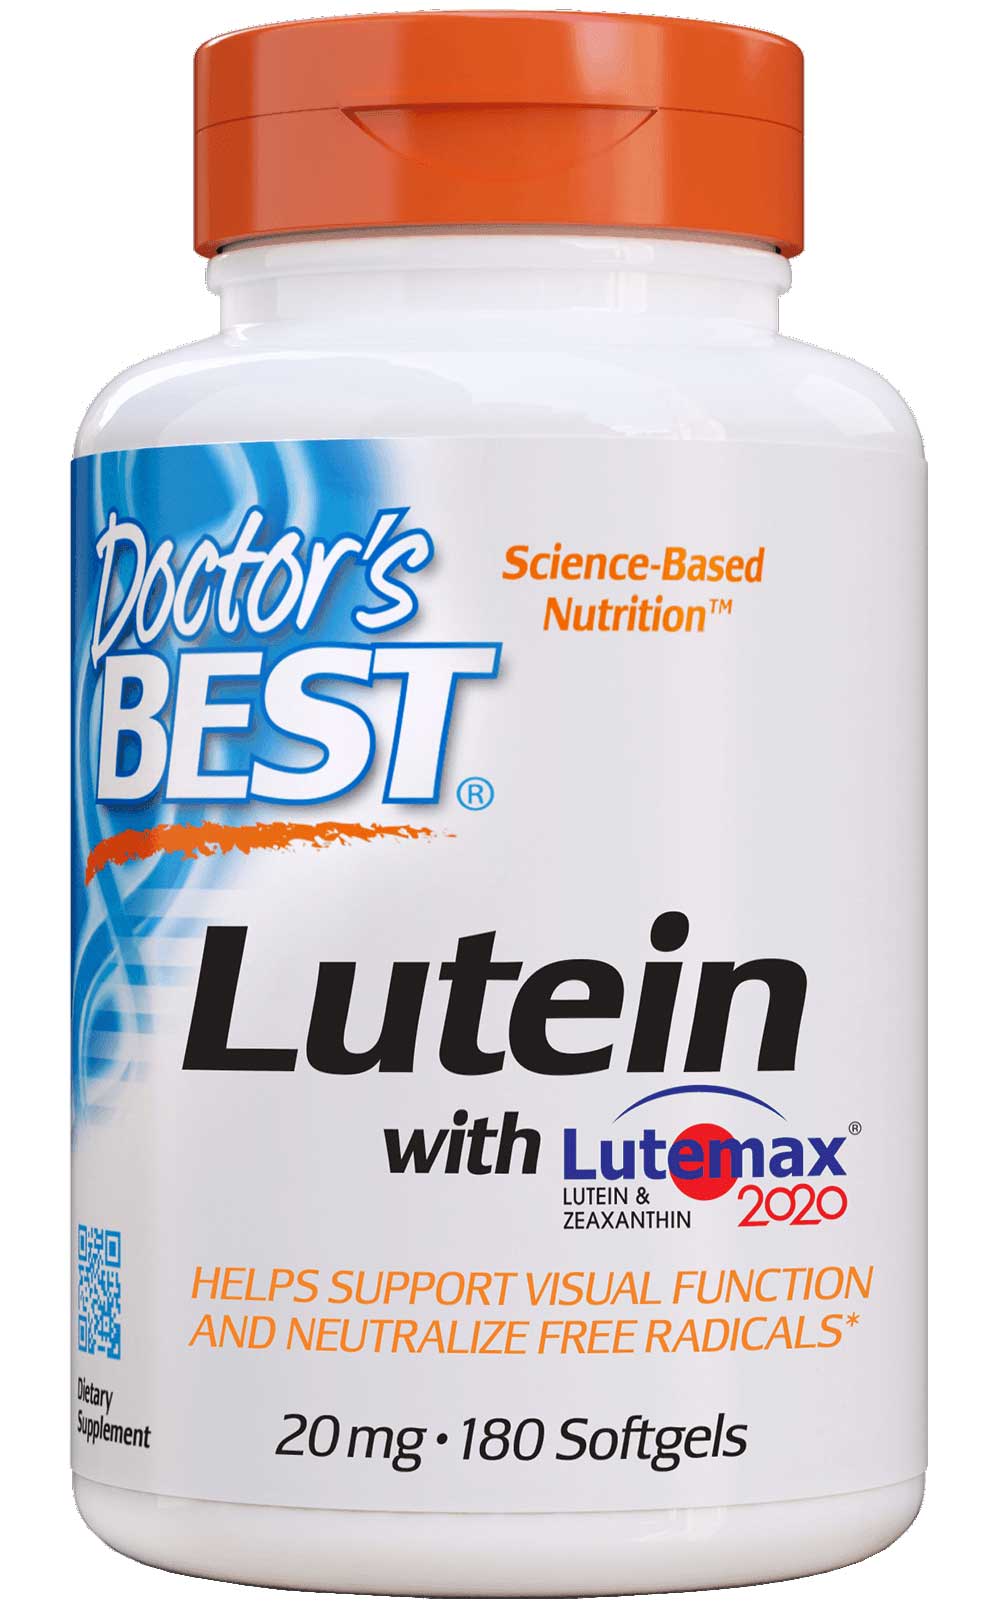 Doctor's Best Lutein with Lutemax